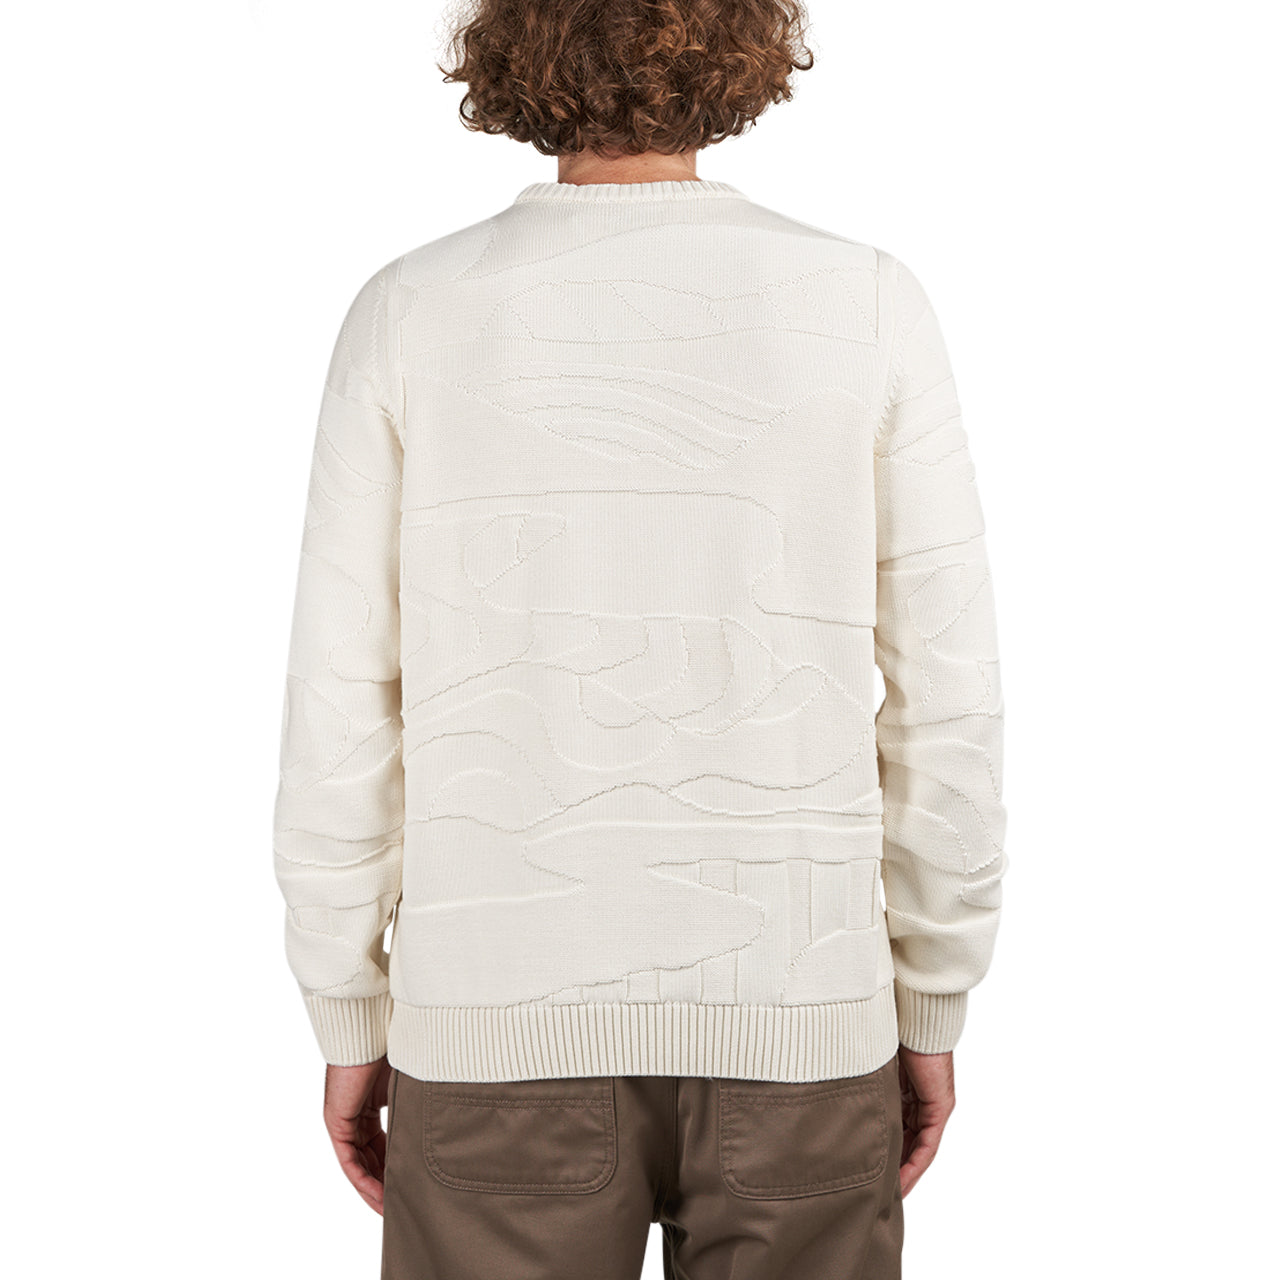 Parra Landscaped Knitted Pullover (Creme)  - Allike Store